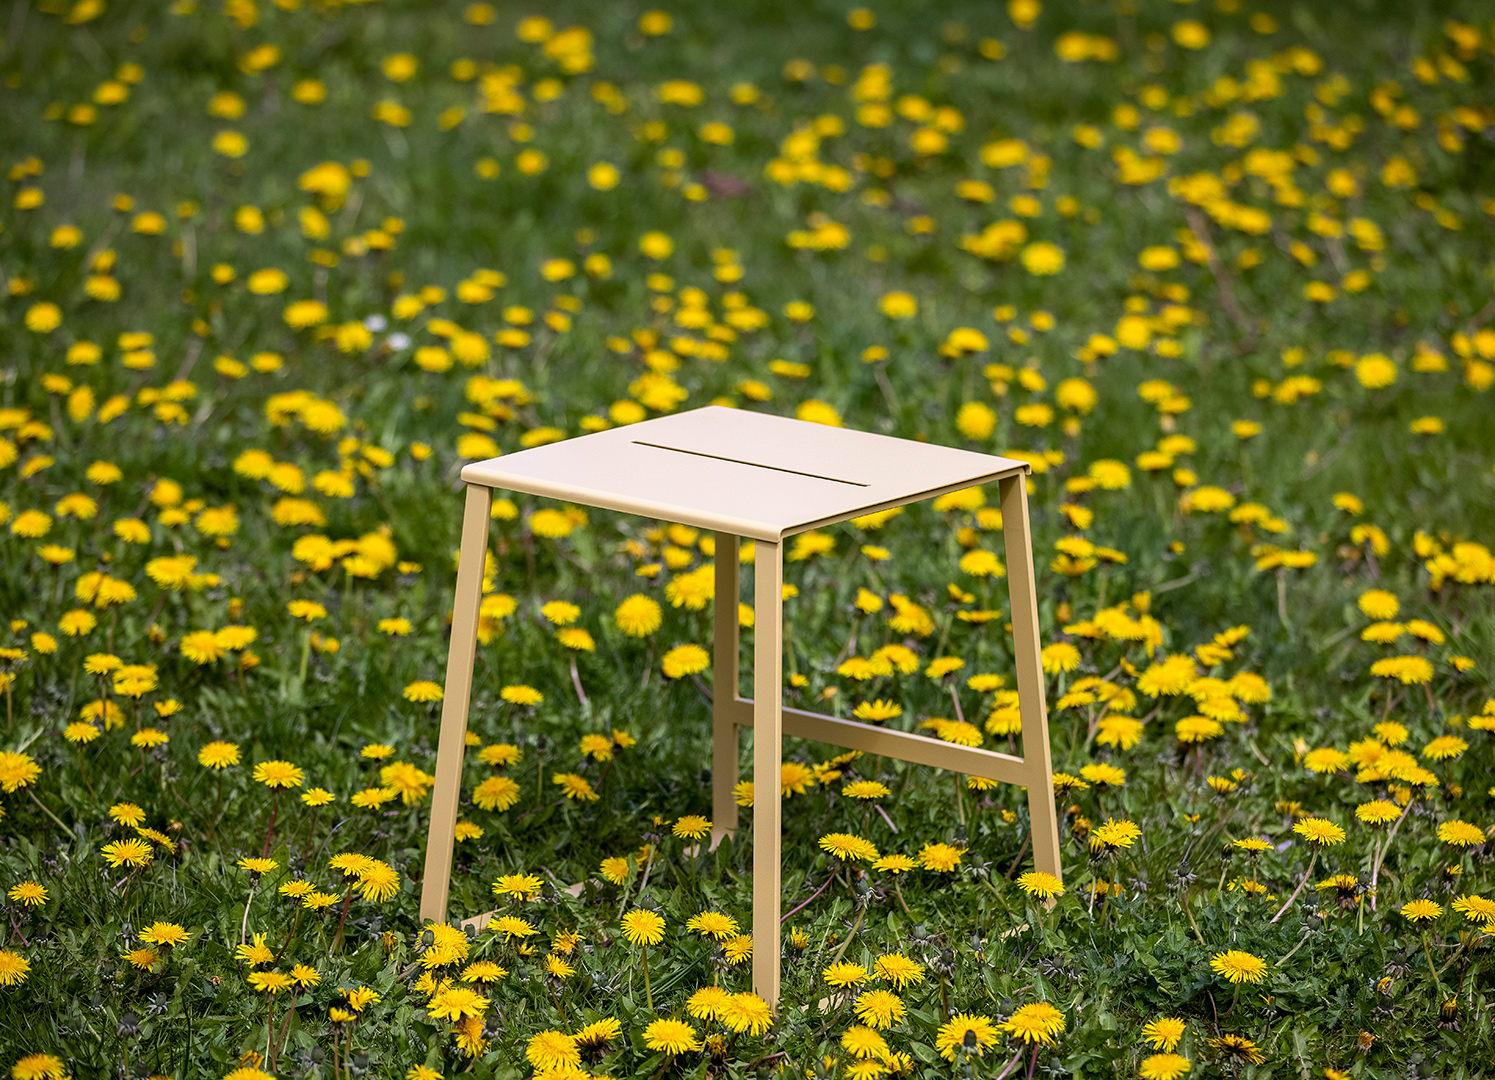 A yellow stool in Danish design stands on a lawn with dandelions